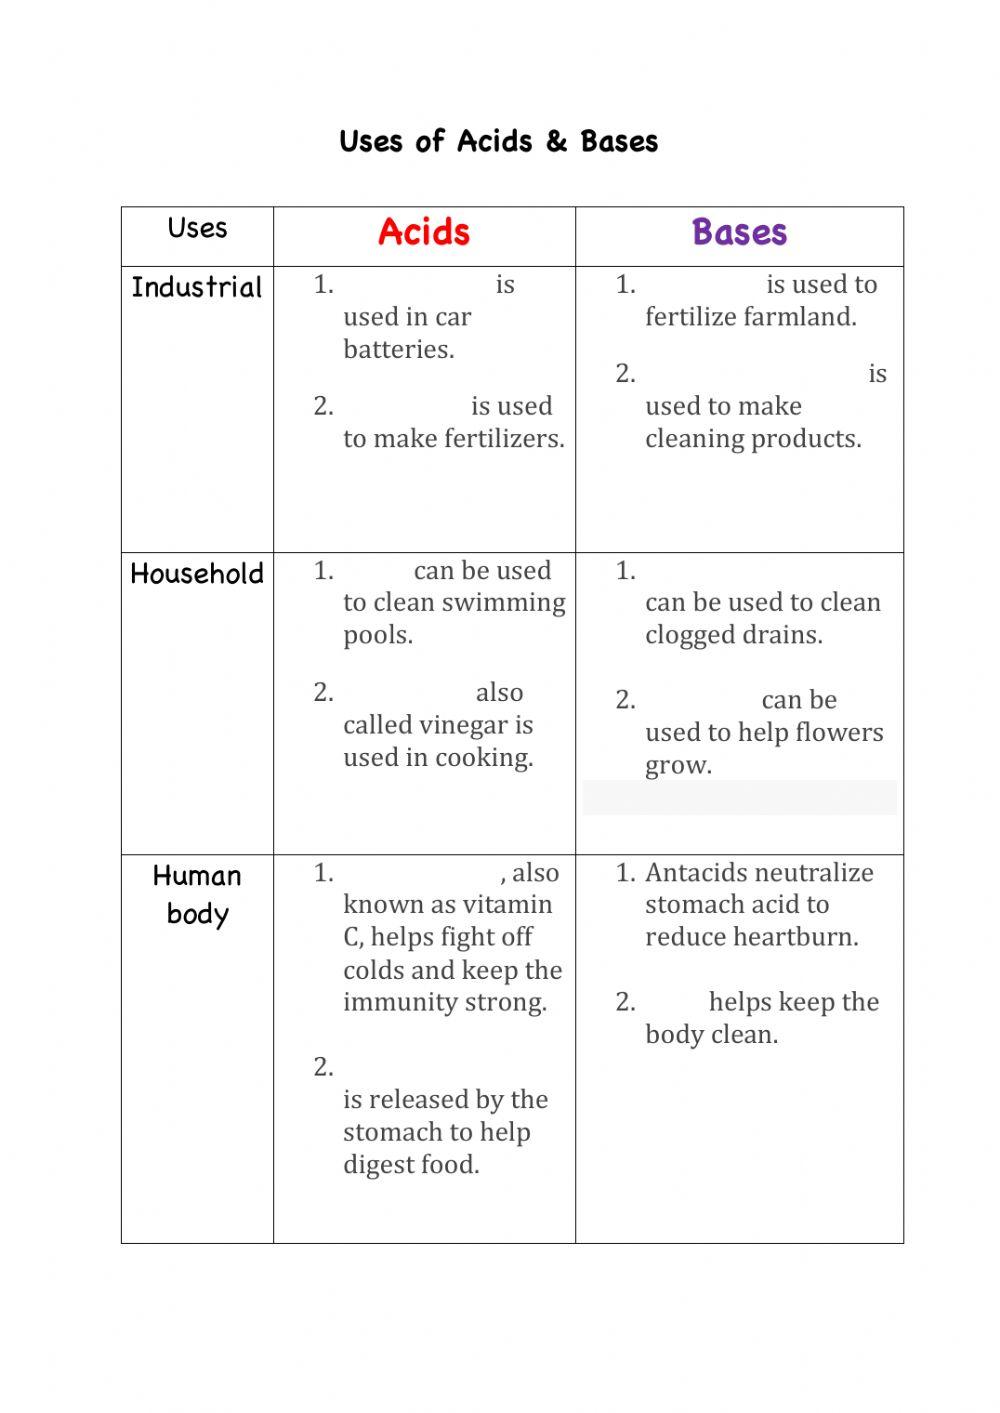 Uses of Acids and Bases